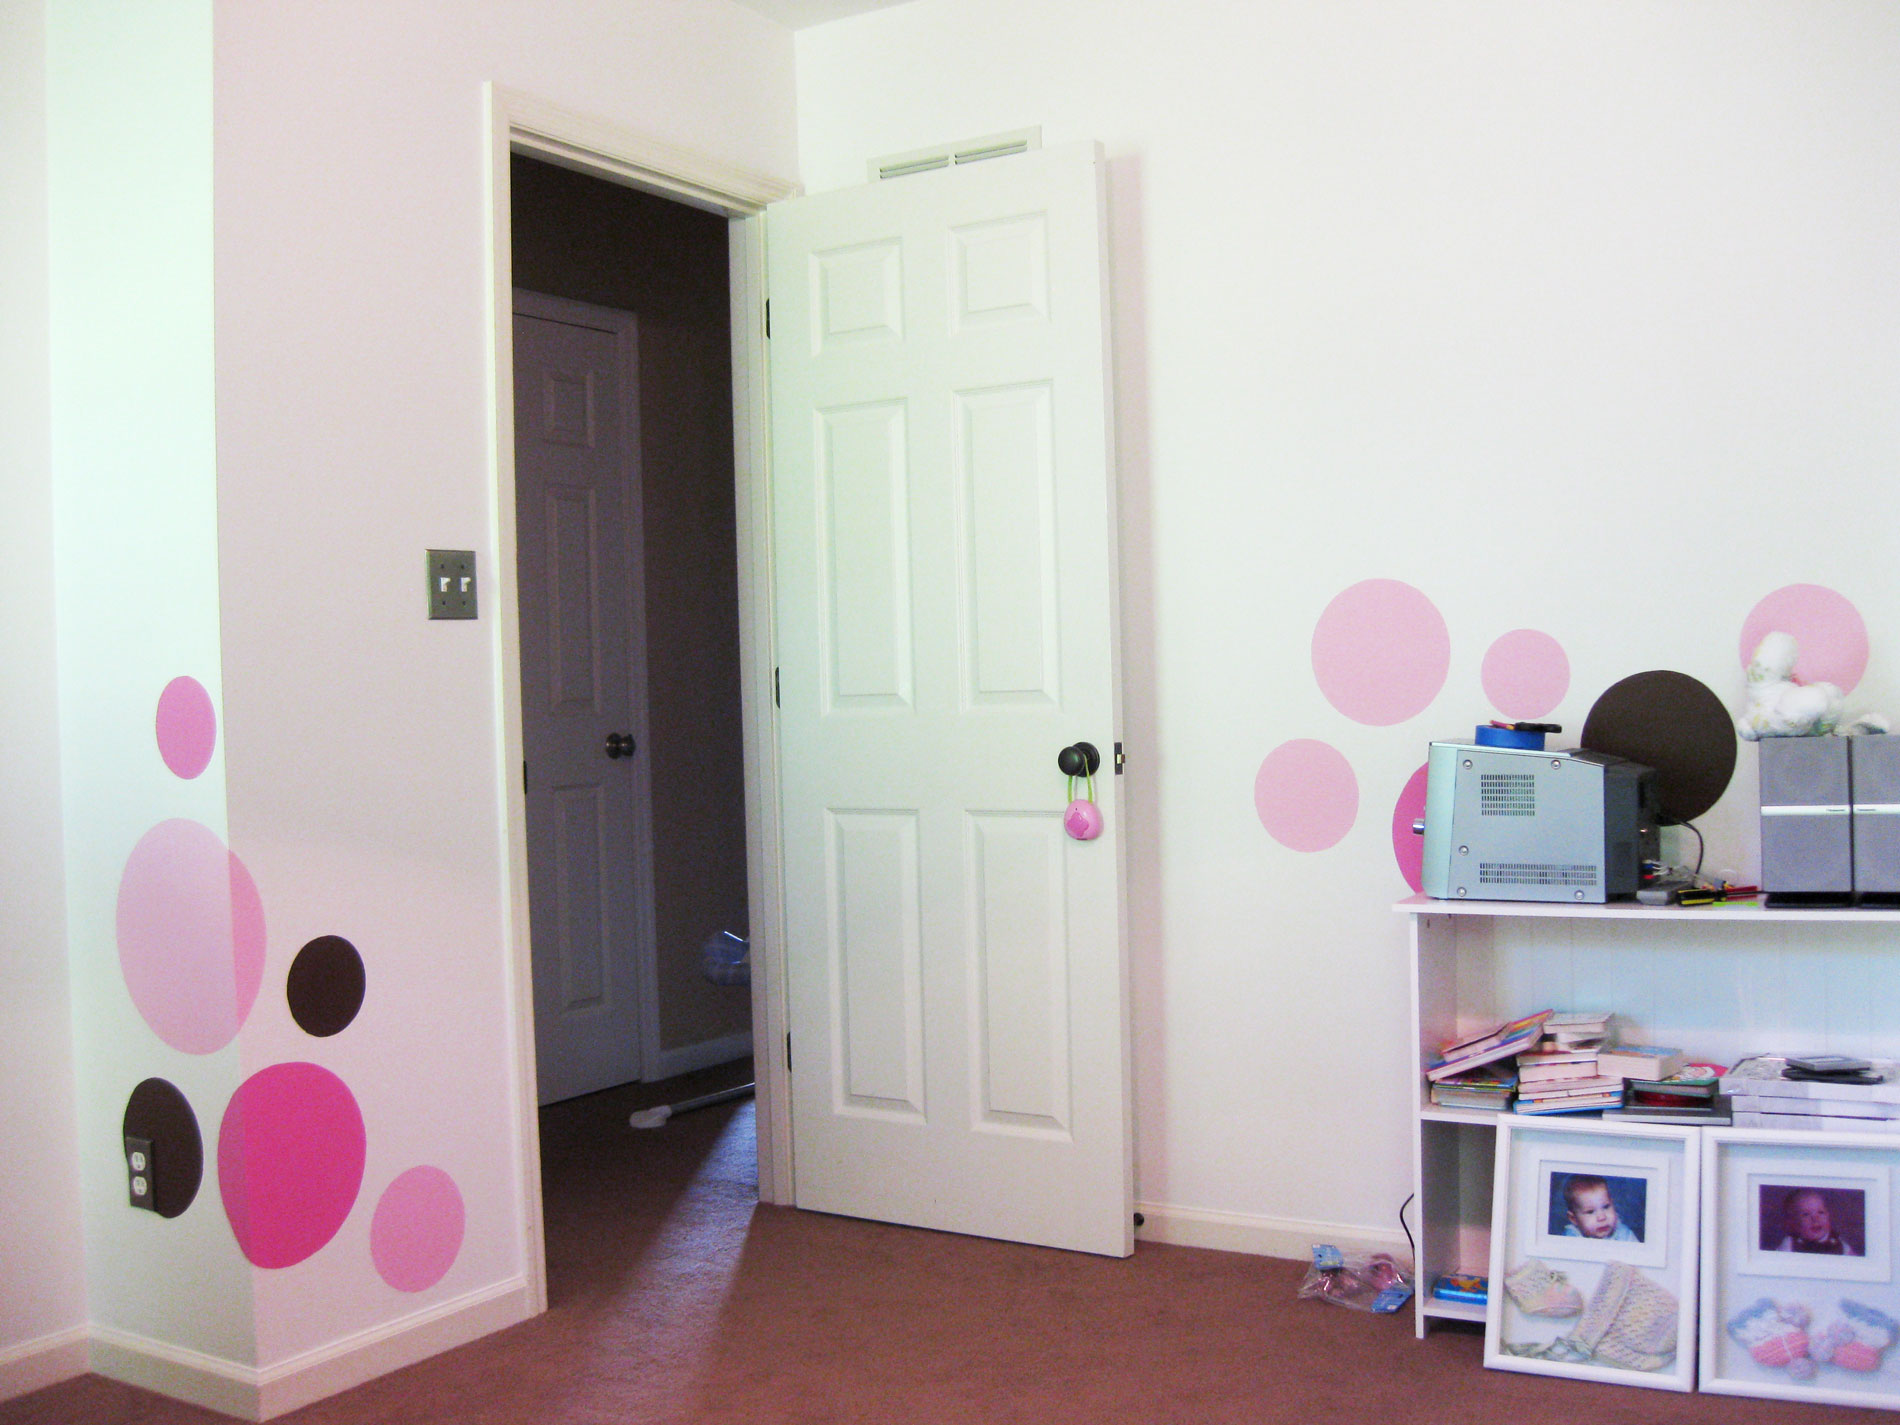 Brown and pink spots painted on the walls of a baby's room